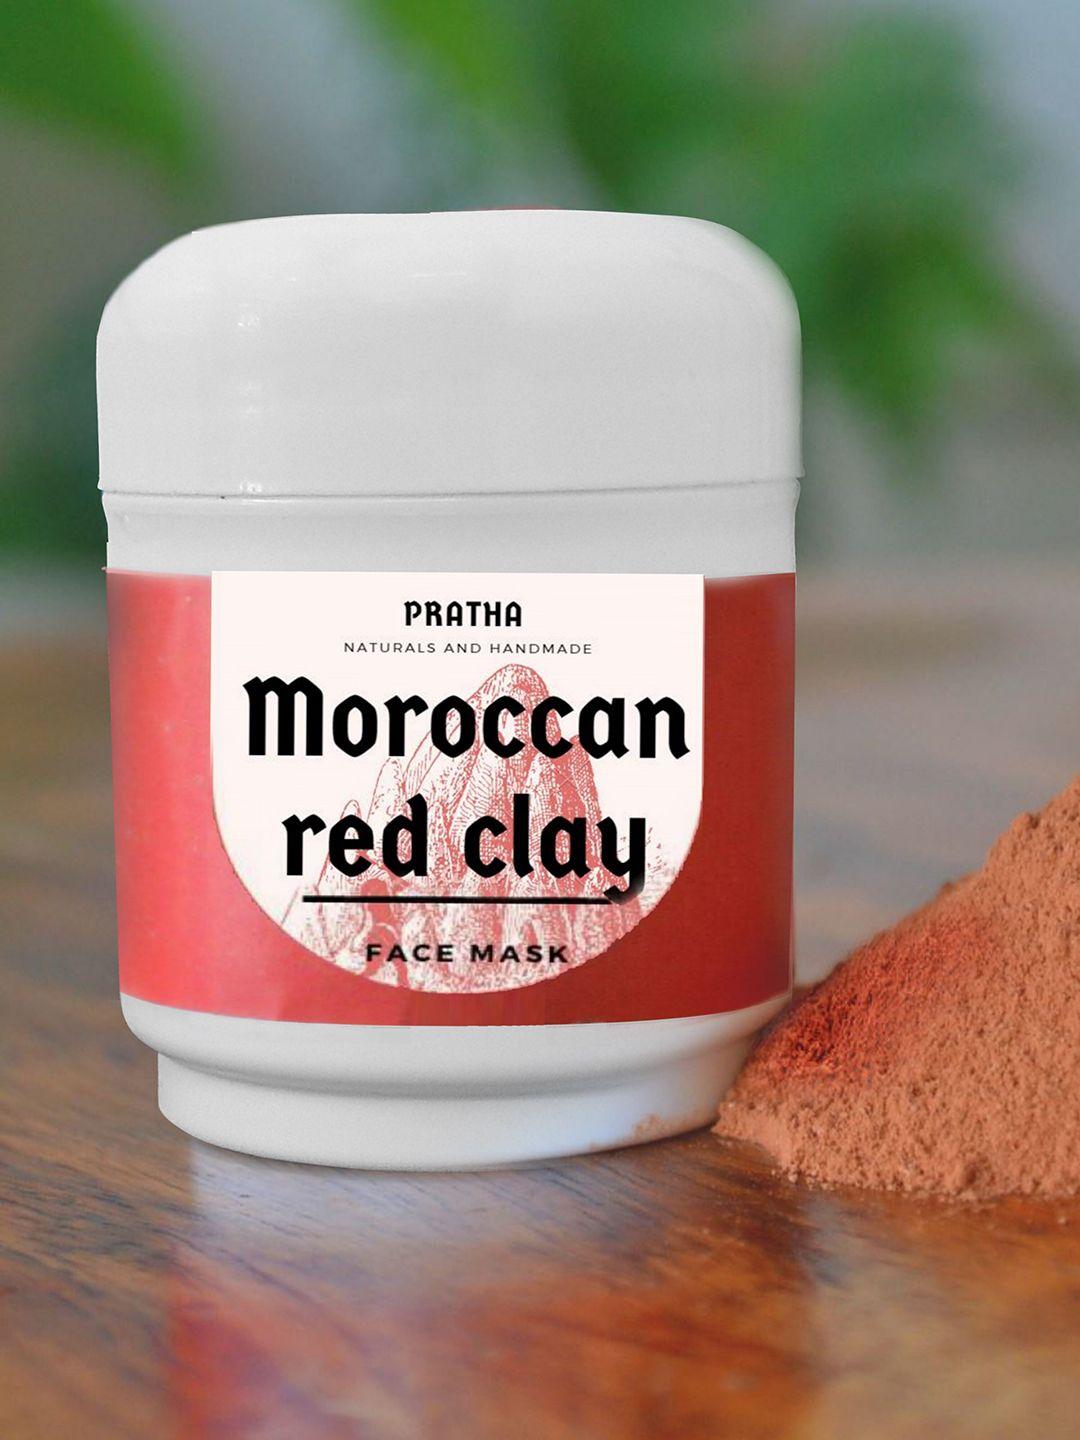 pratha moroccan red clay face mask 50 g